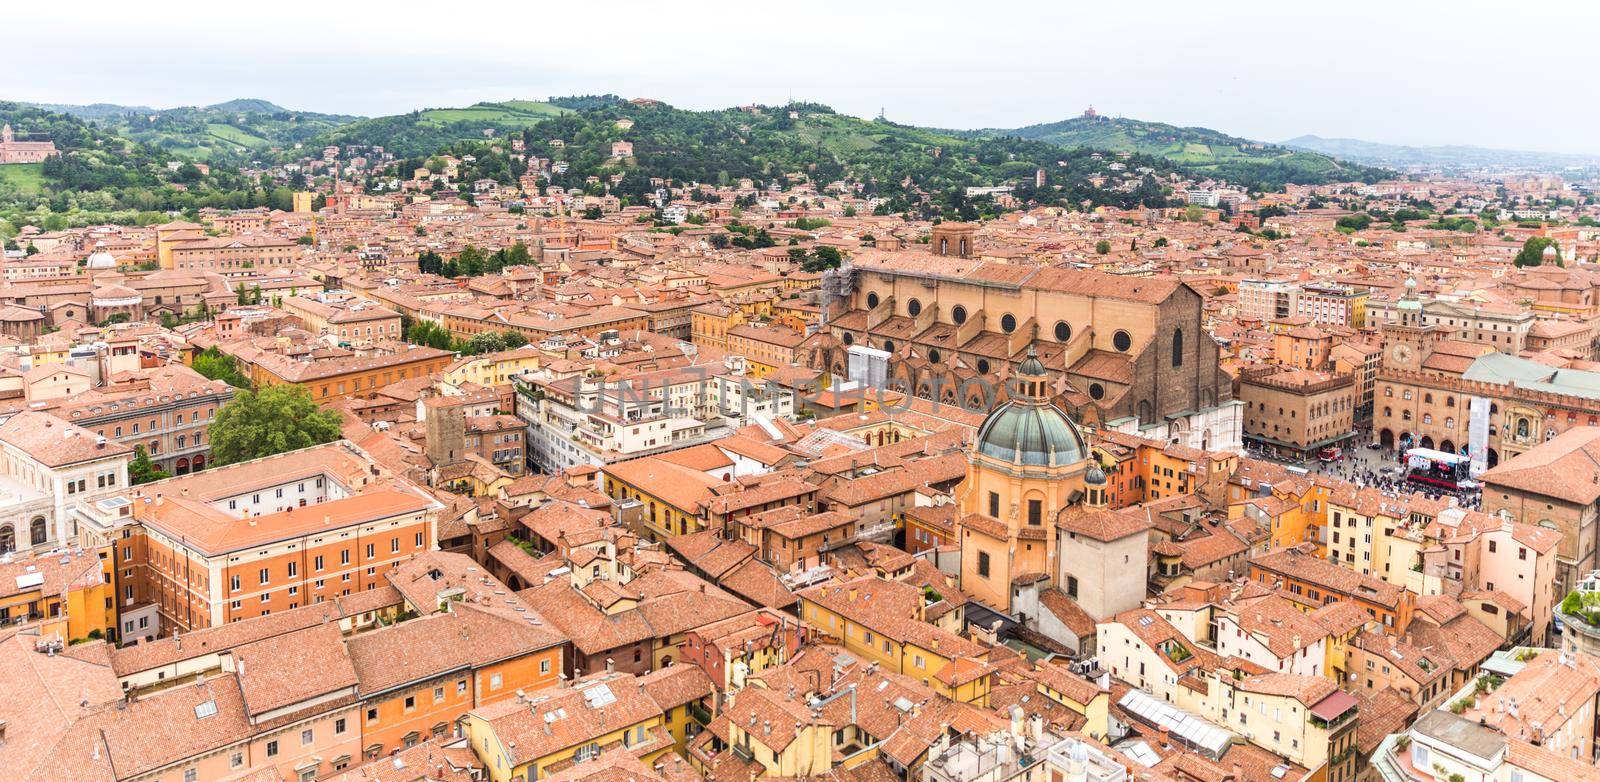 Bologna. Aerial view of the city from top of tower